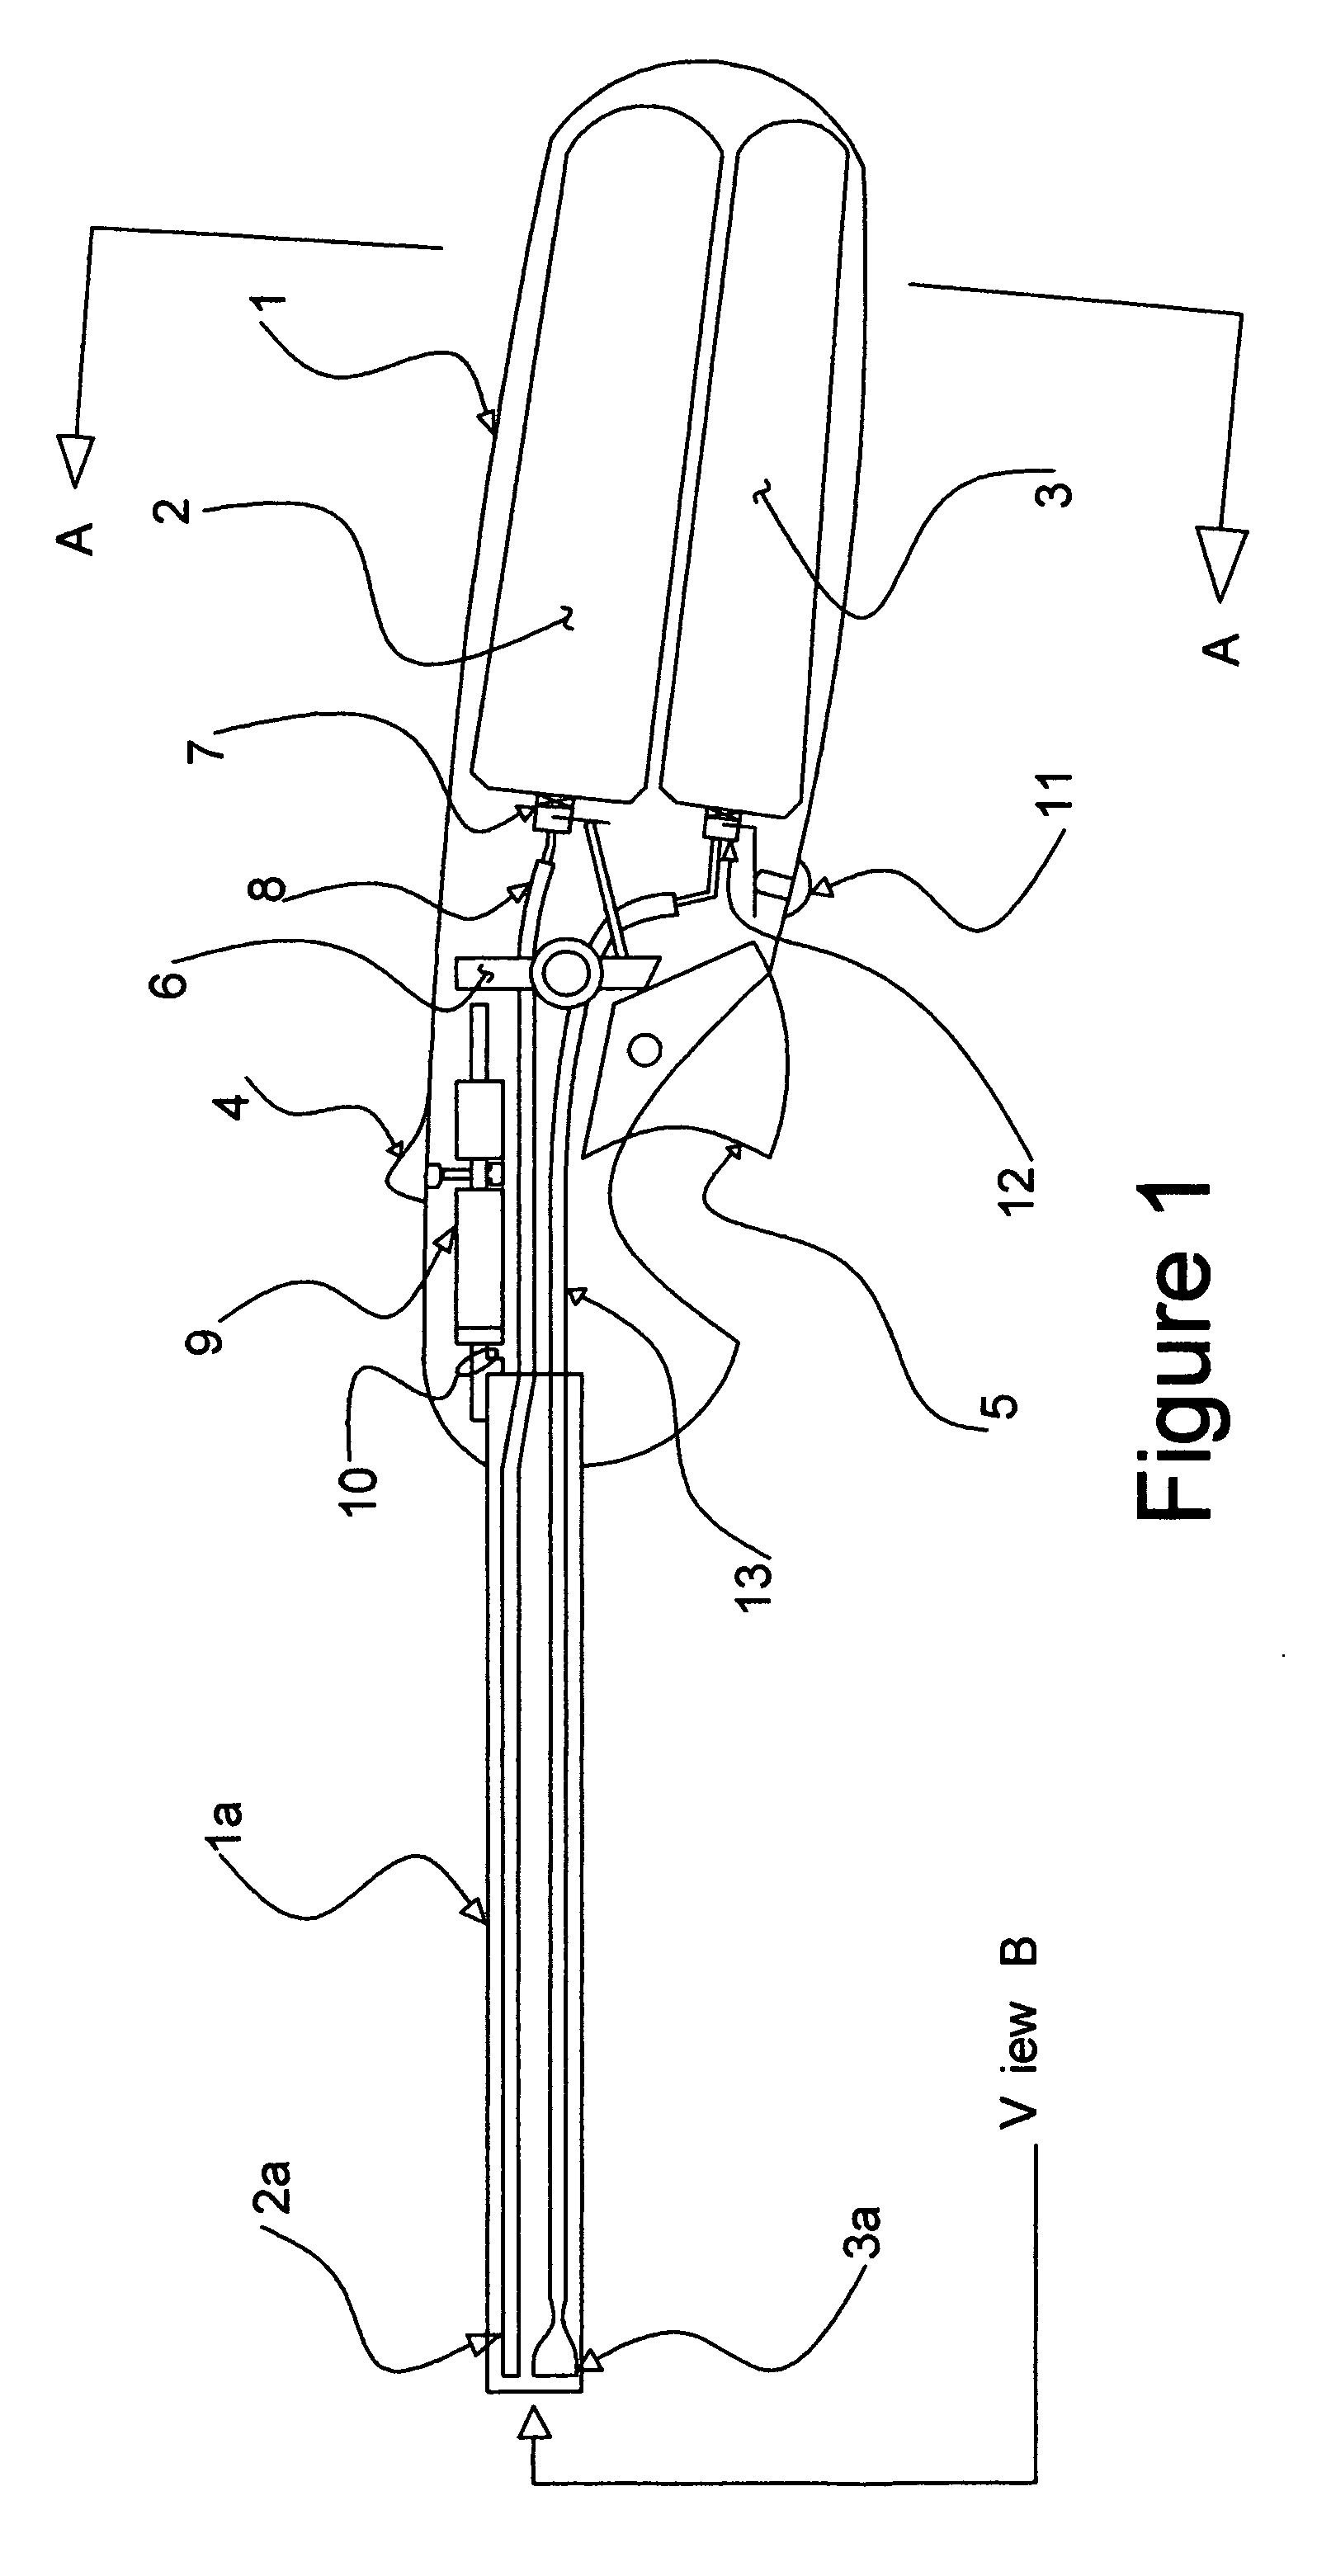 Single device to create flame and extinguish flame